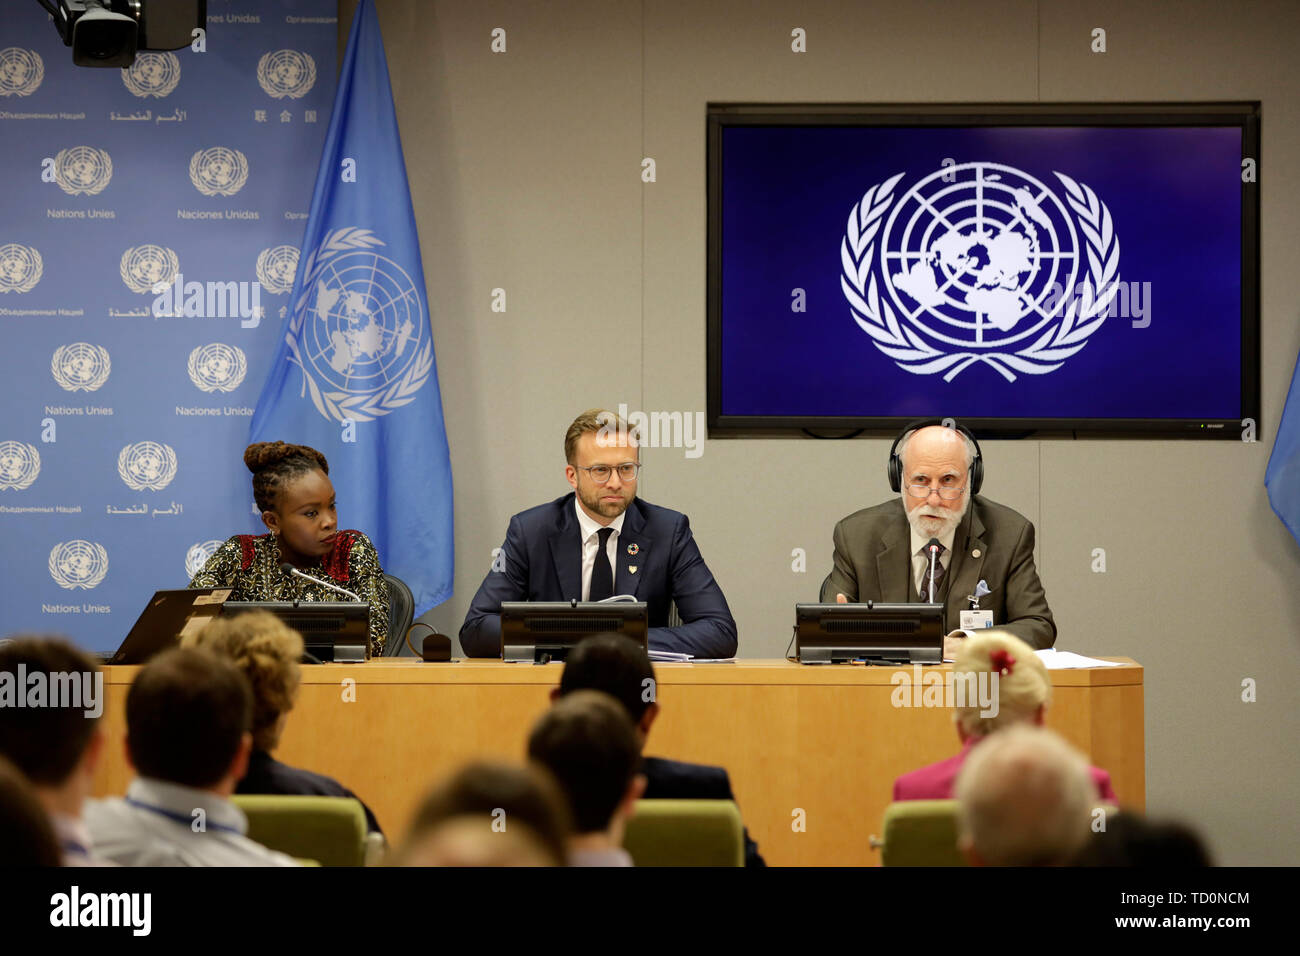 (190610) -- UNITED NATIONS, June 10, 2019 (Xinhua) -- (From L to R) Nanjira Sambuli, Digital Equality Advocacy Manager for the World Wide Web Foundation, Nikolai Astrup, Norway's Minister of Digitalization, and Vinton Cerf, Chief Internet Evangelist at Google, attend a press briefing on the report of the High-level Panel on Digital Cooperation, at the UN headquarters in New York, on June 10, 2019. An expert group appointed by the United Nations called on governments, the private sector and civil society, in its first report released Monday, to work together urgently to maximize the benefits an Stock Photo